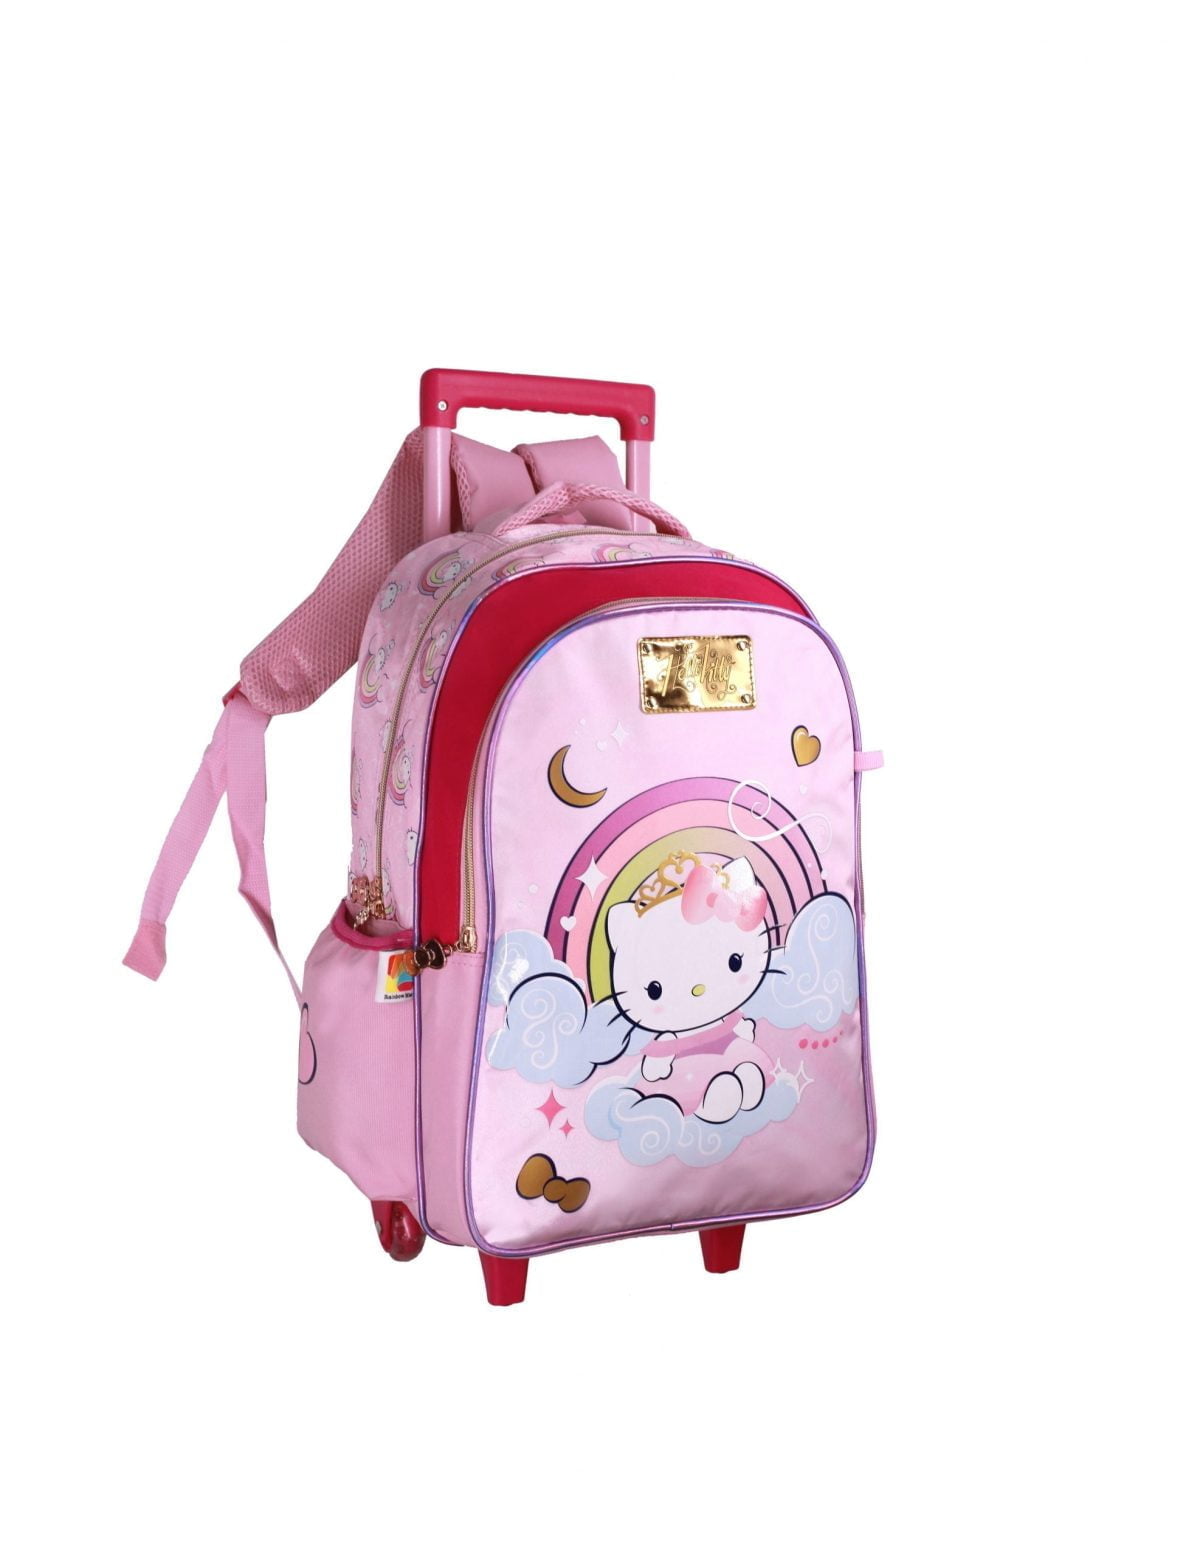 Hk675 3090T 2 Scaled The Trolley Bag Is A Reliable Companion For Your Journey. The Trolley Features Main Zip Compartment To Keep Your Child'S Belonging Or School Items. The Trolley Has Comfortable Handle On The Top. The Fine Quality Material And Printing Makes It Durable And Stylish Option. It Is Easy To Zip And Unzip With Smooth Zippers And Pullers. The Wheels On The Bottom Make It Easy To Drag. Wipe With A Clean And Dry Cloth. Hello Kitty Trolley Bag 15&Amp;Quot; - 2 Main Compartments And 2 Side Pockets (Hk675)